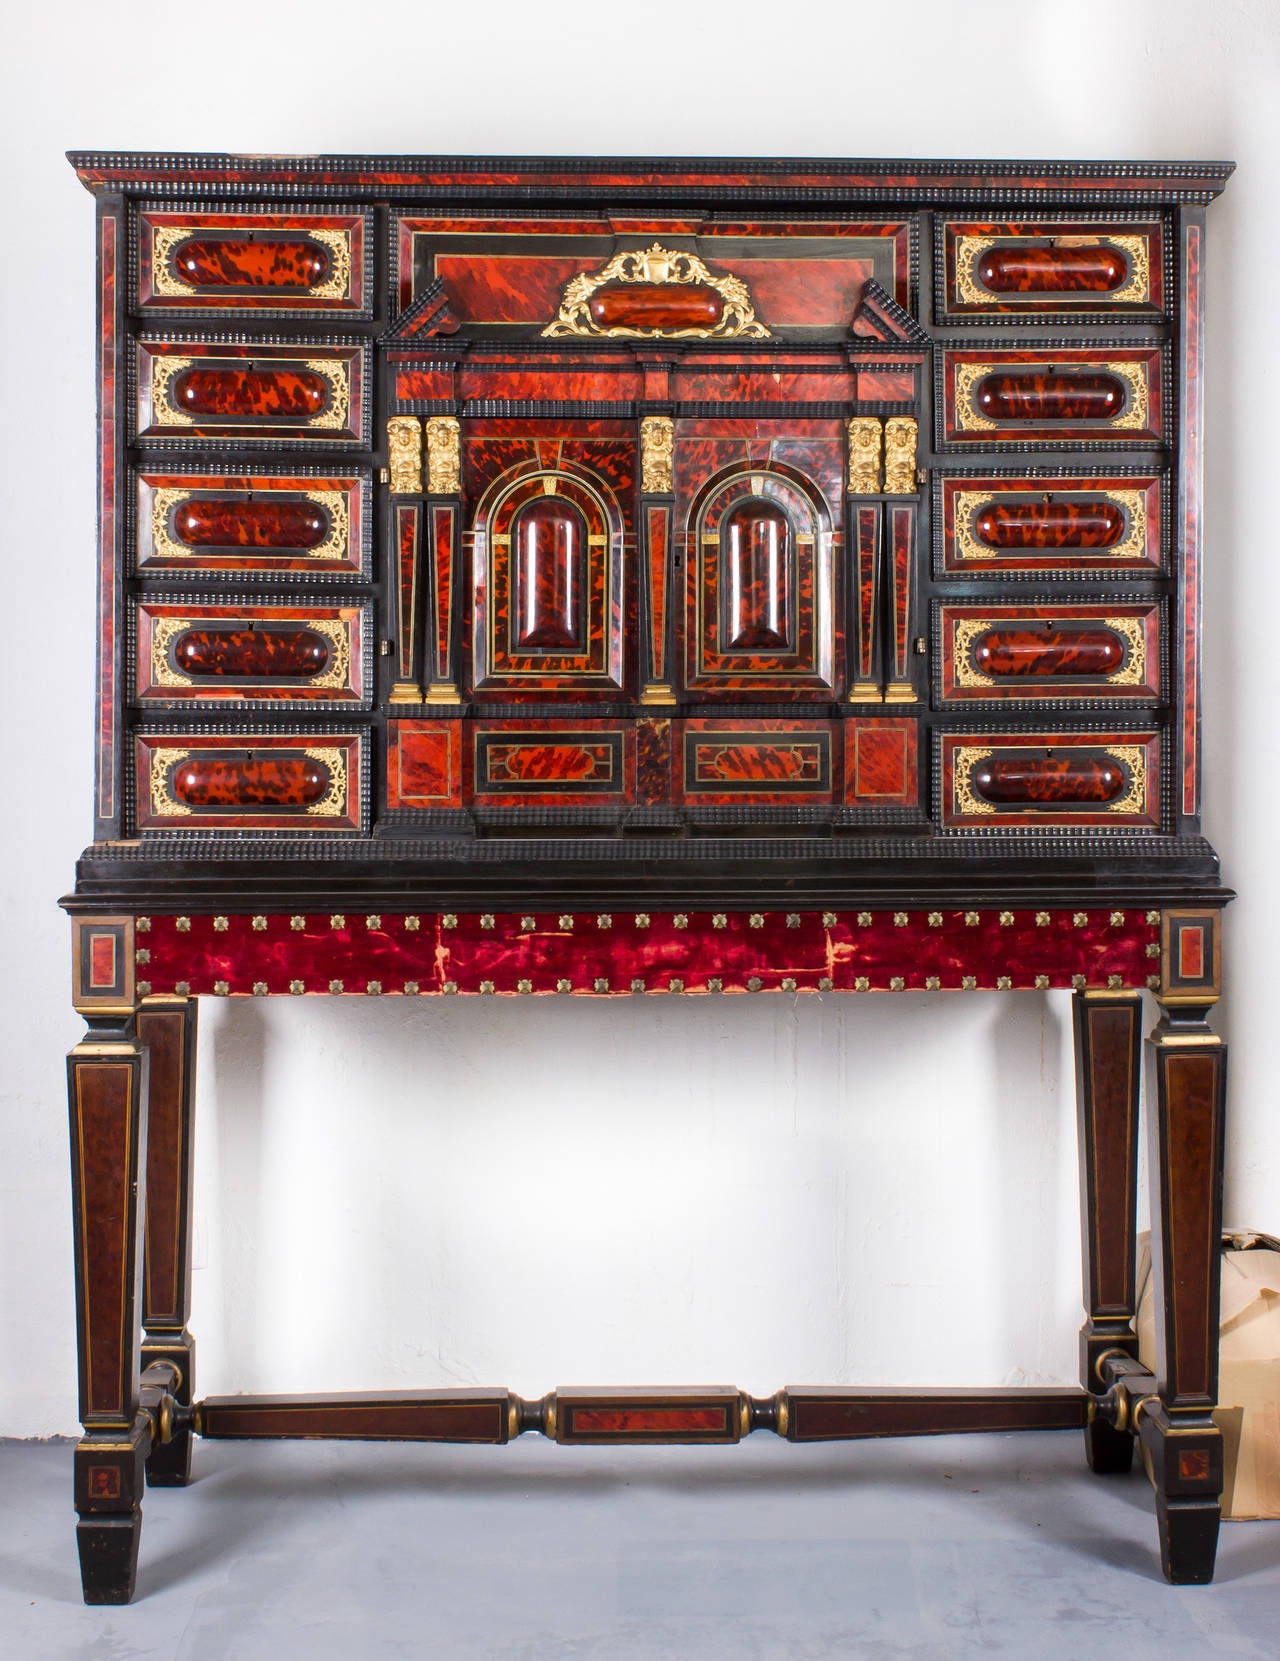 Belgian 17th Century Flemish (Amberes) Cabinet un Tortoise Shell and Ebony For Sale